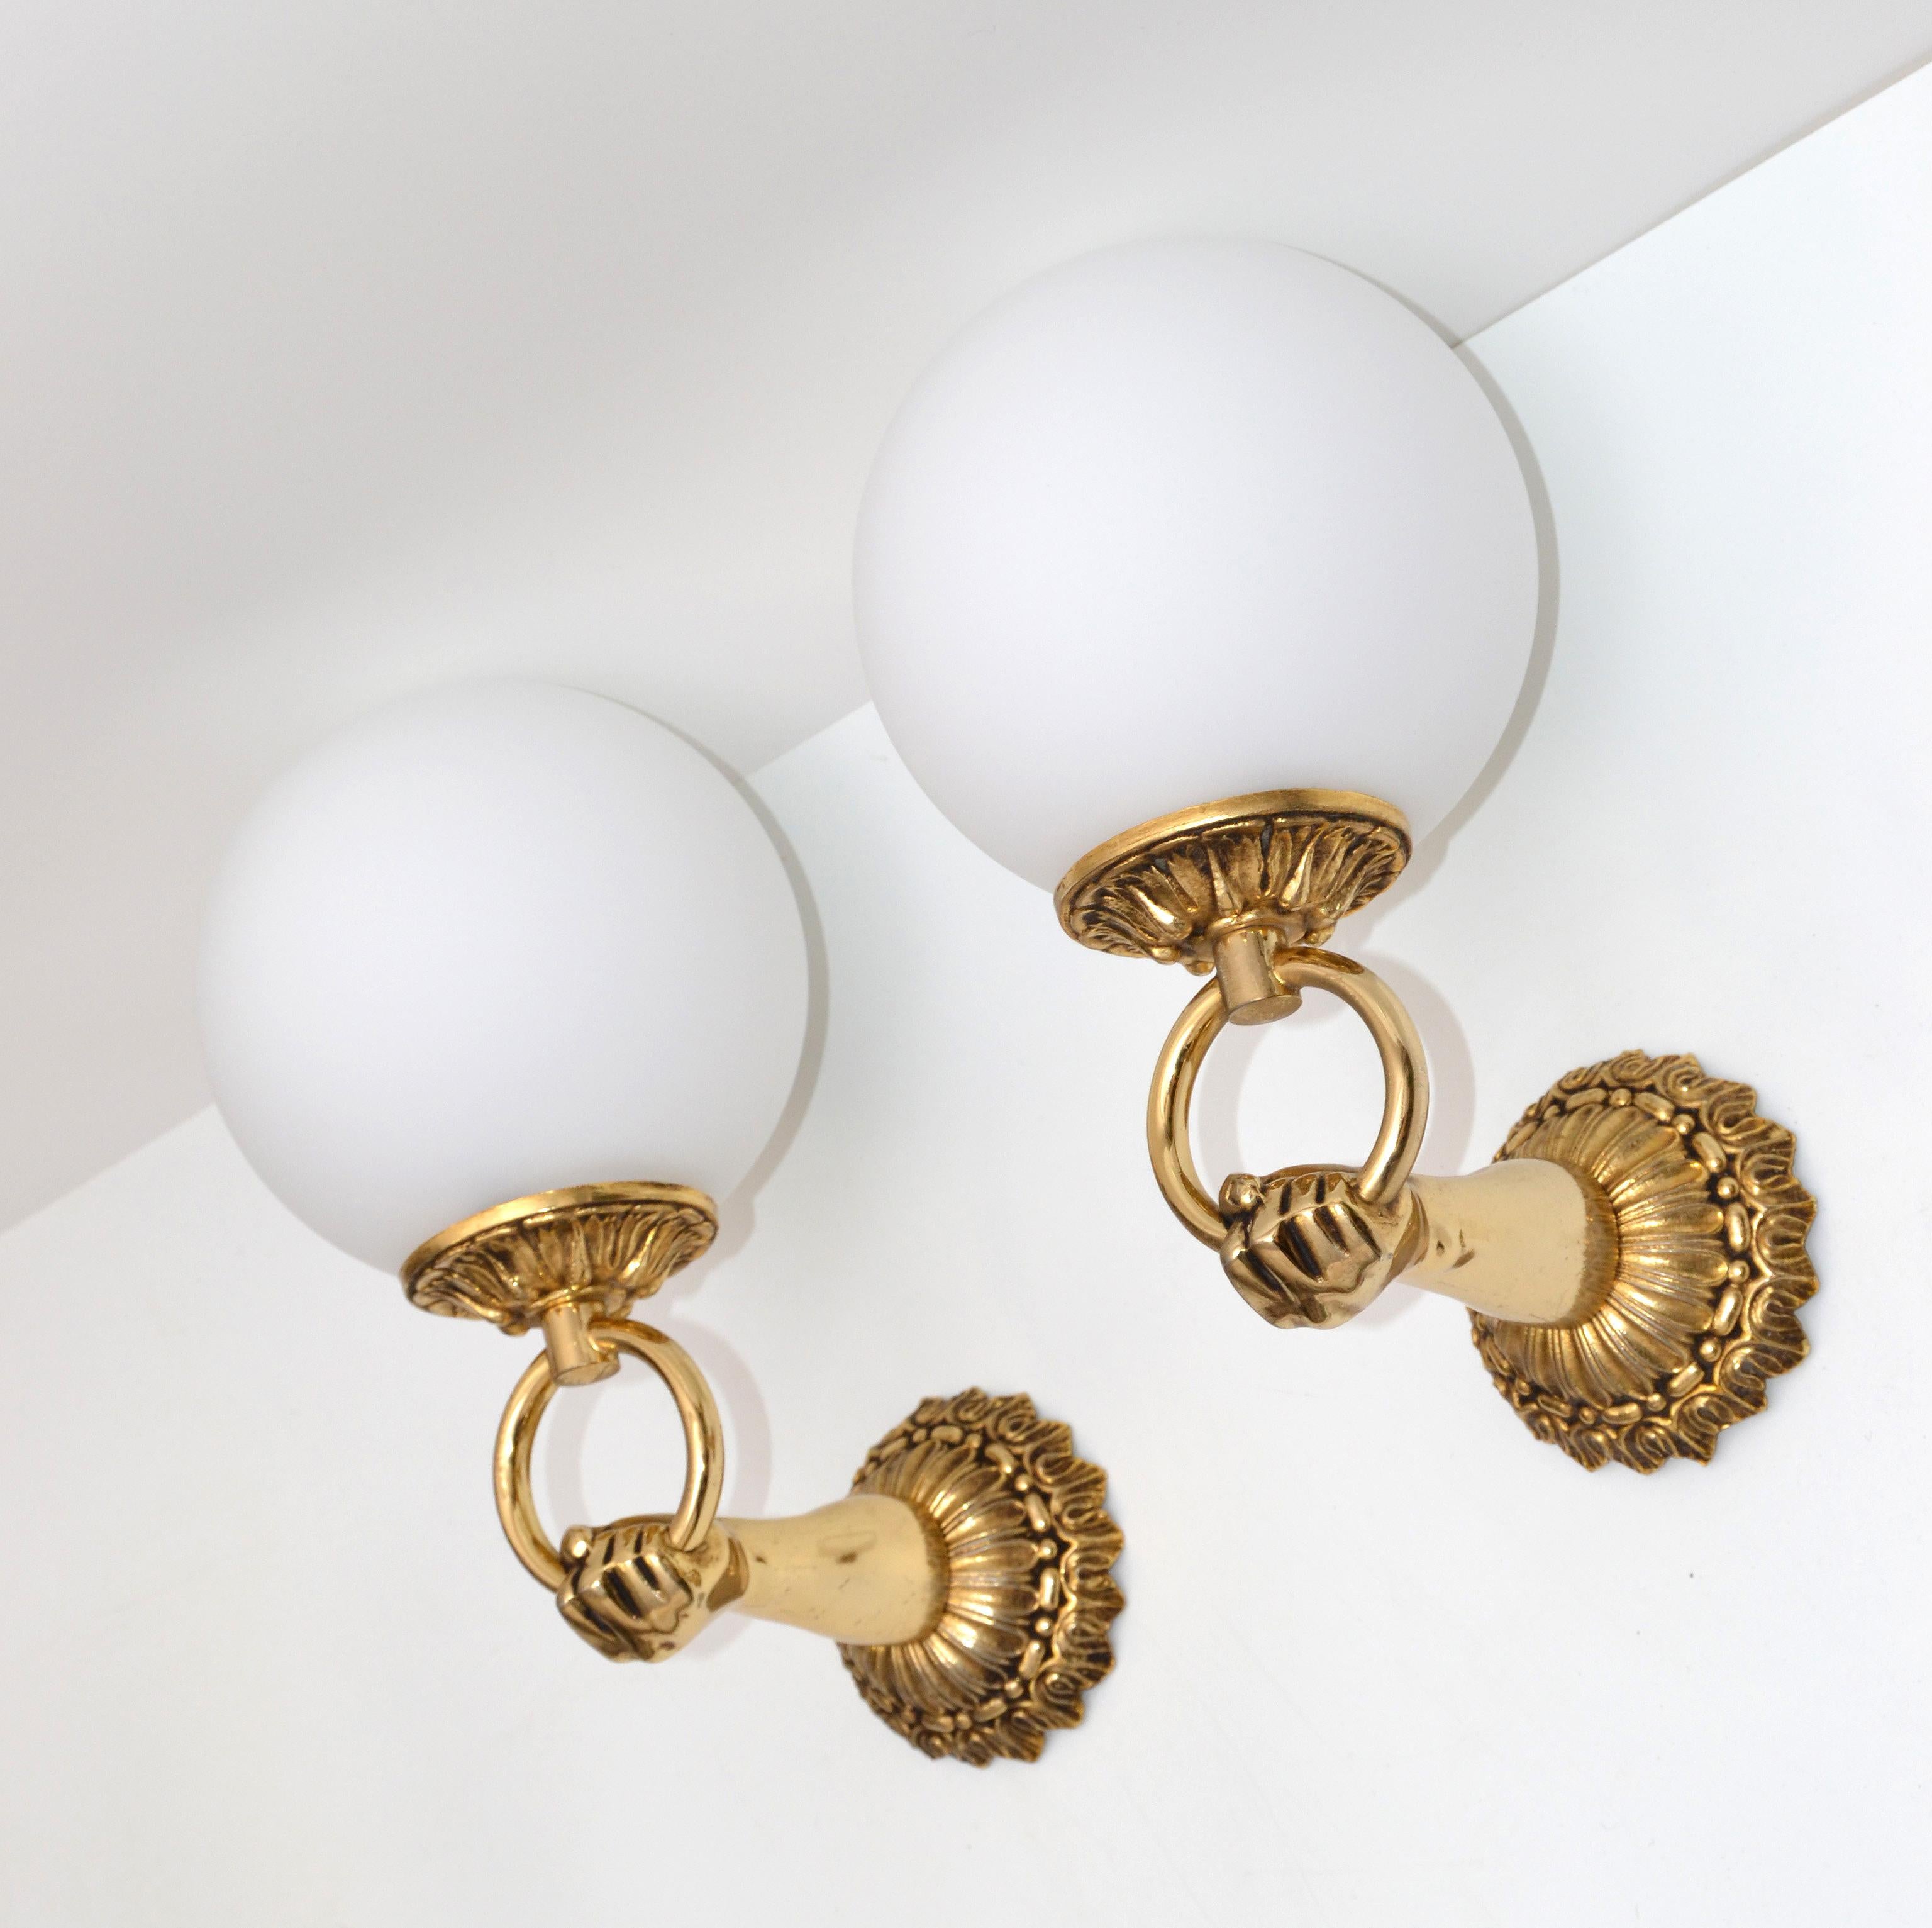 1960s French Neoclassical Hand Brass and Opaline Glass Sconces, 3 Pair Available For Sale 6